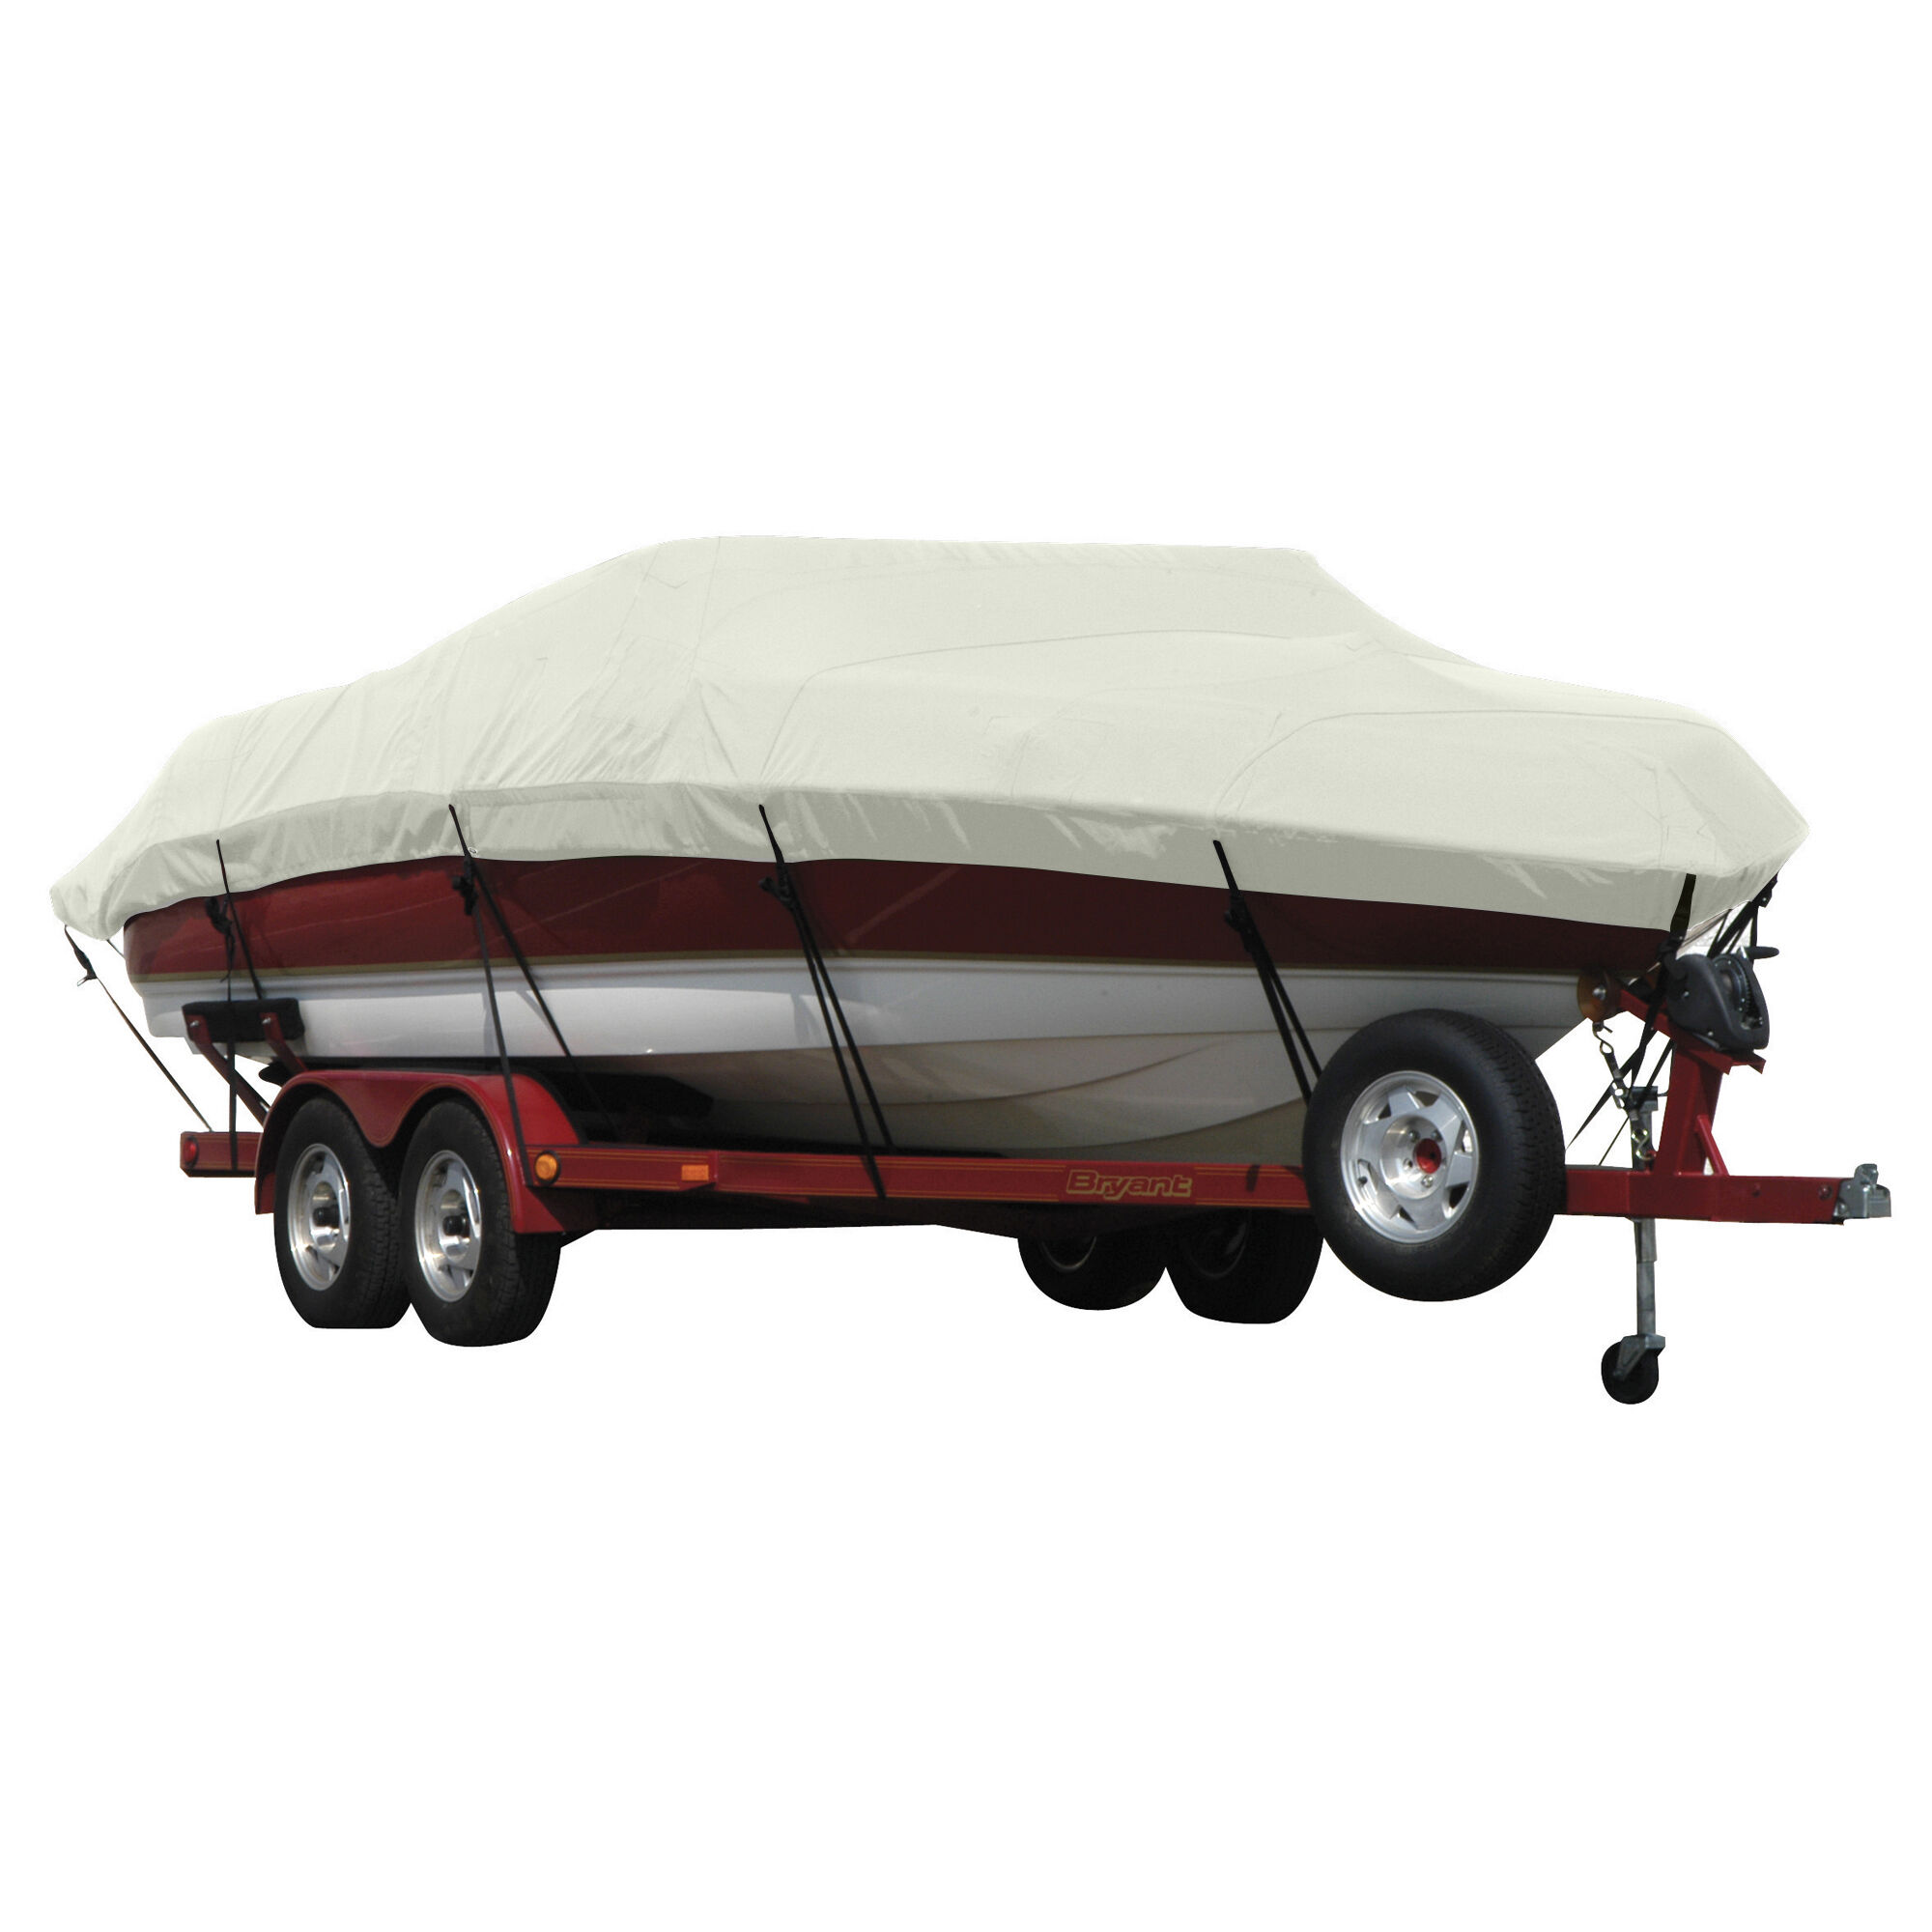 Covermate Exact Fit Sunbrella Boat Cover for Commander Party Cat 2600 Party Cat 2600 I/O. Silver Acrylic